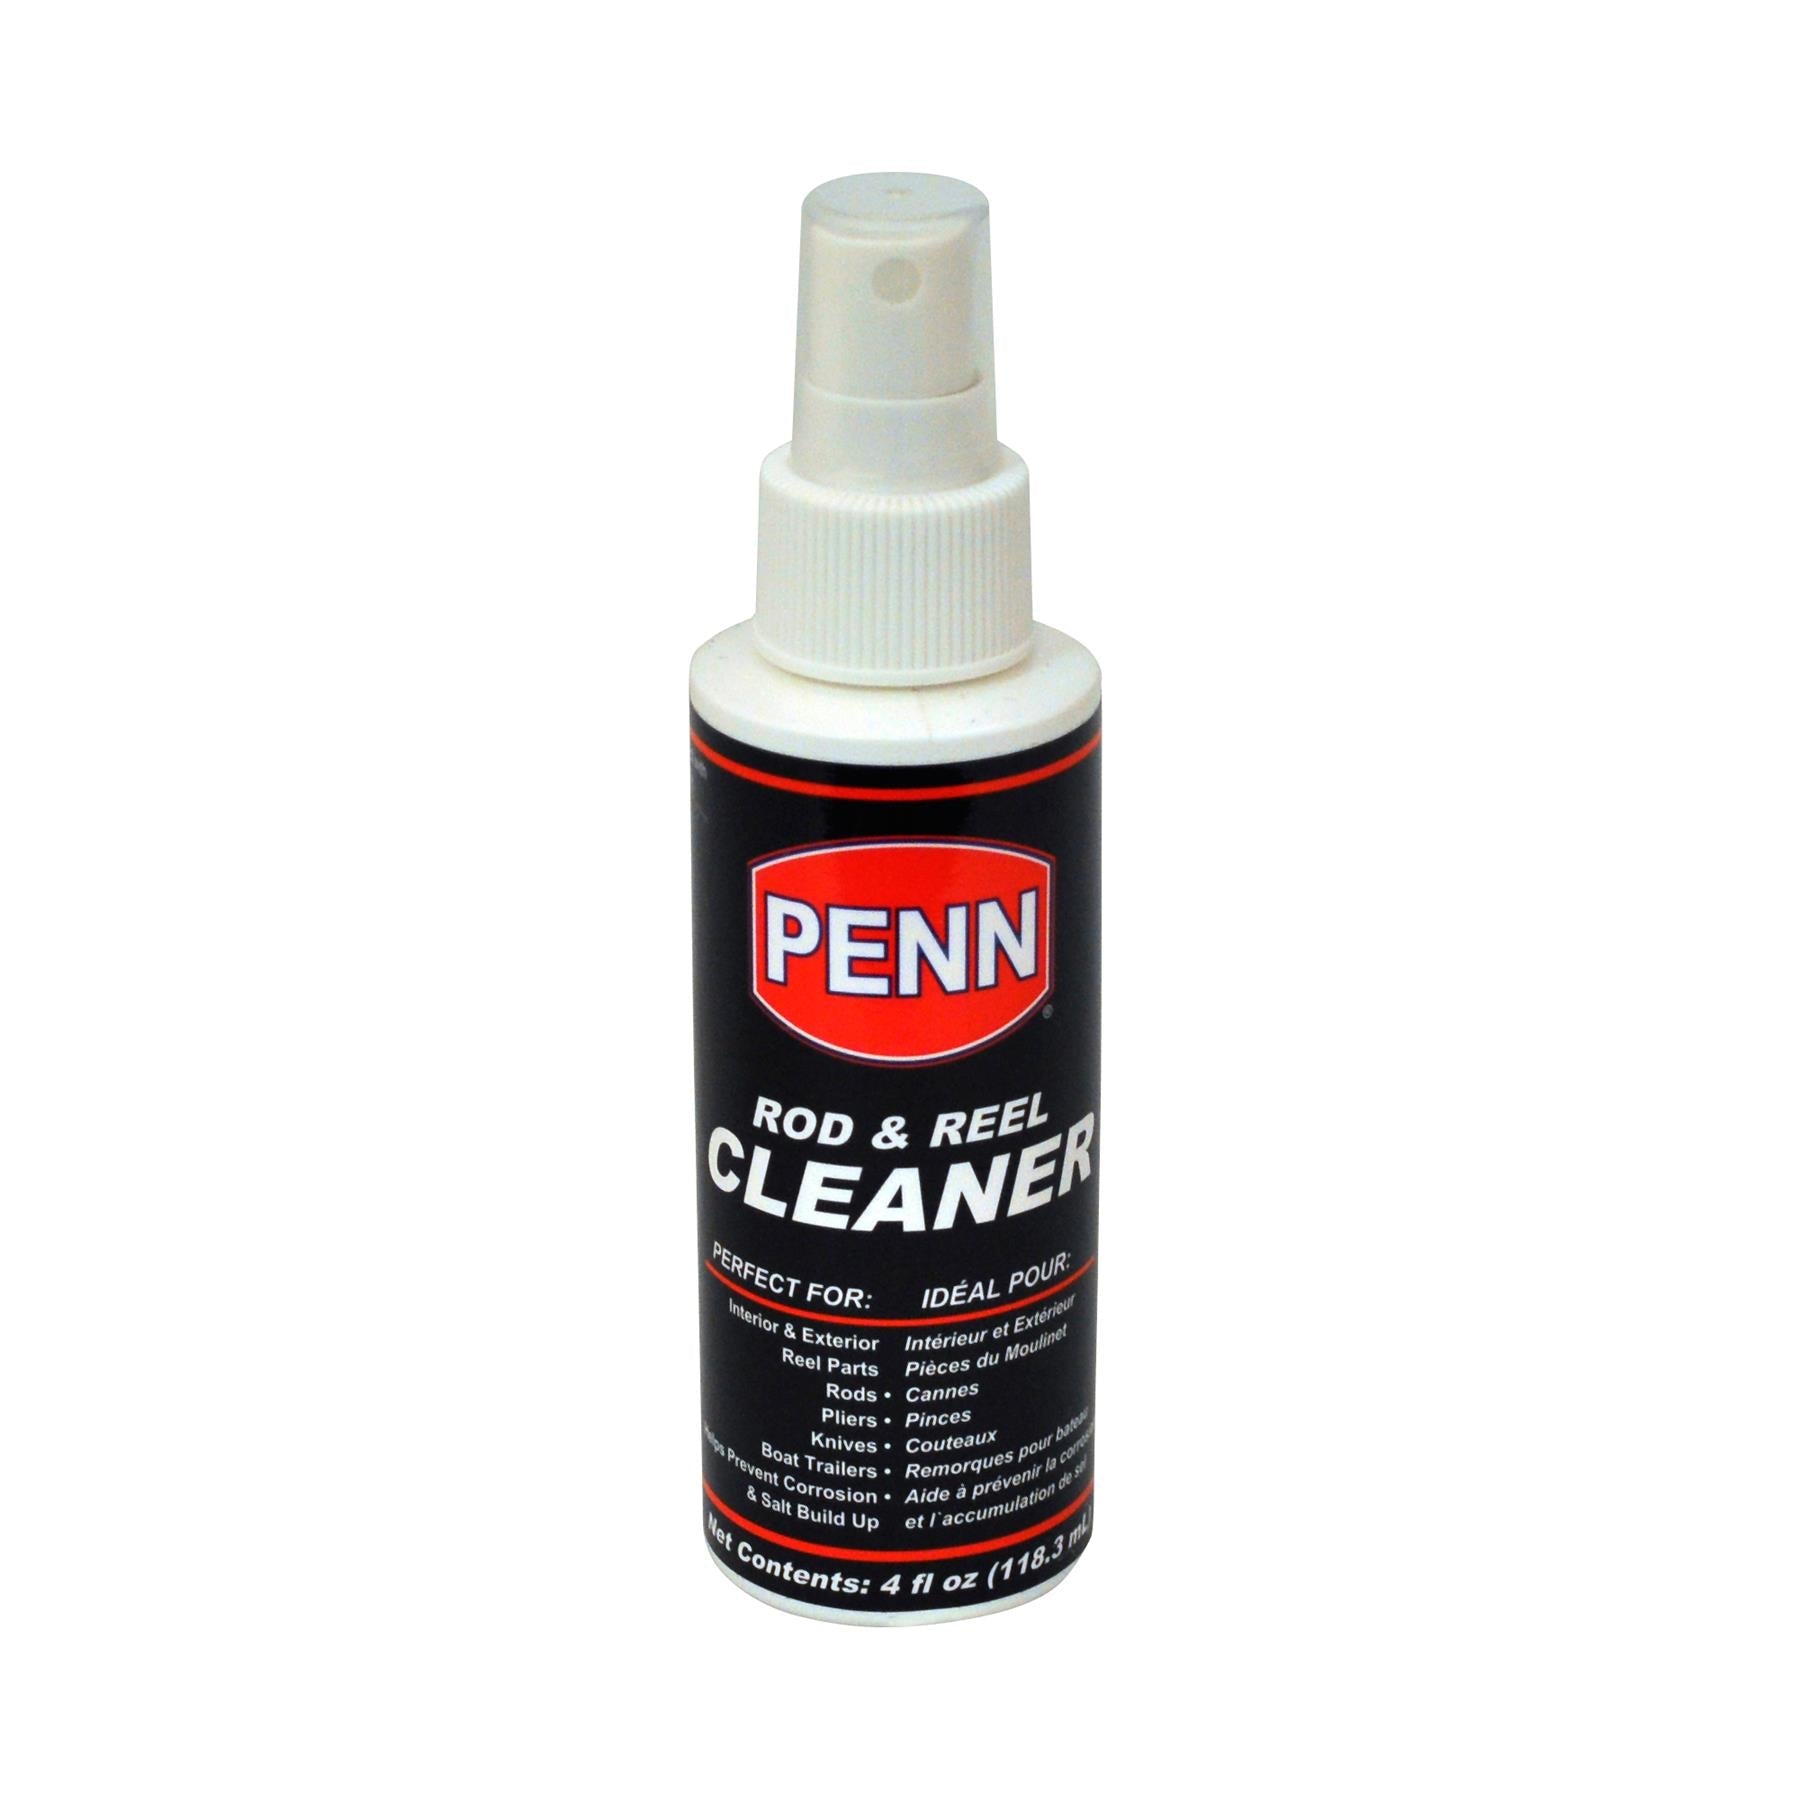 Penn Precision Rod and Reel Cleaner 4oz